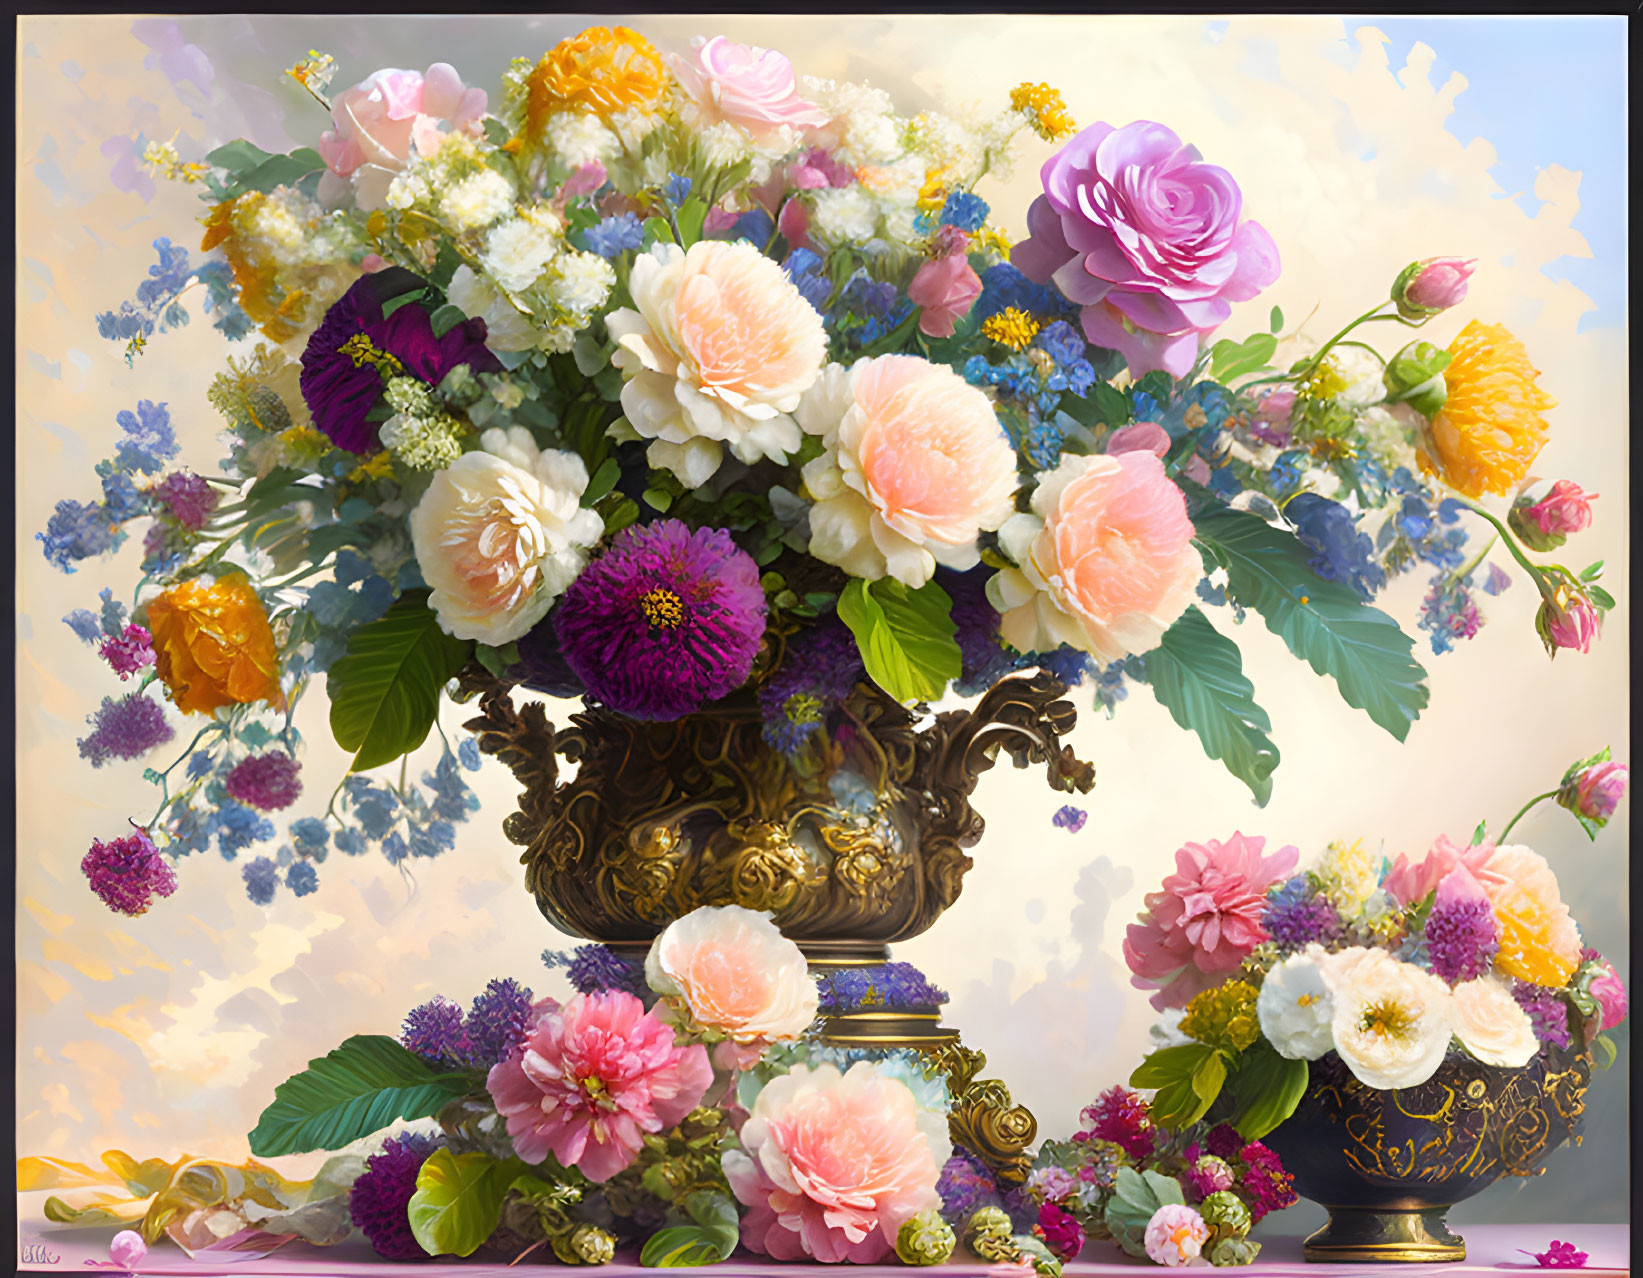 Assorted flowers in classical vase on soft background